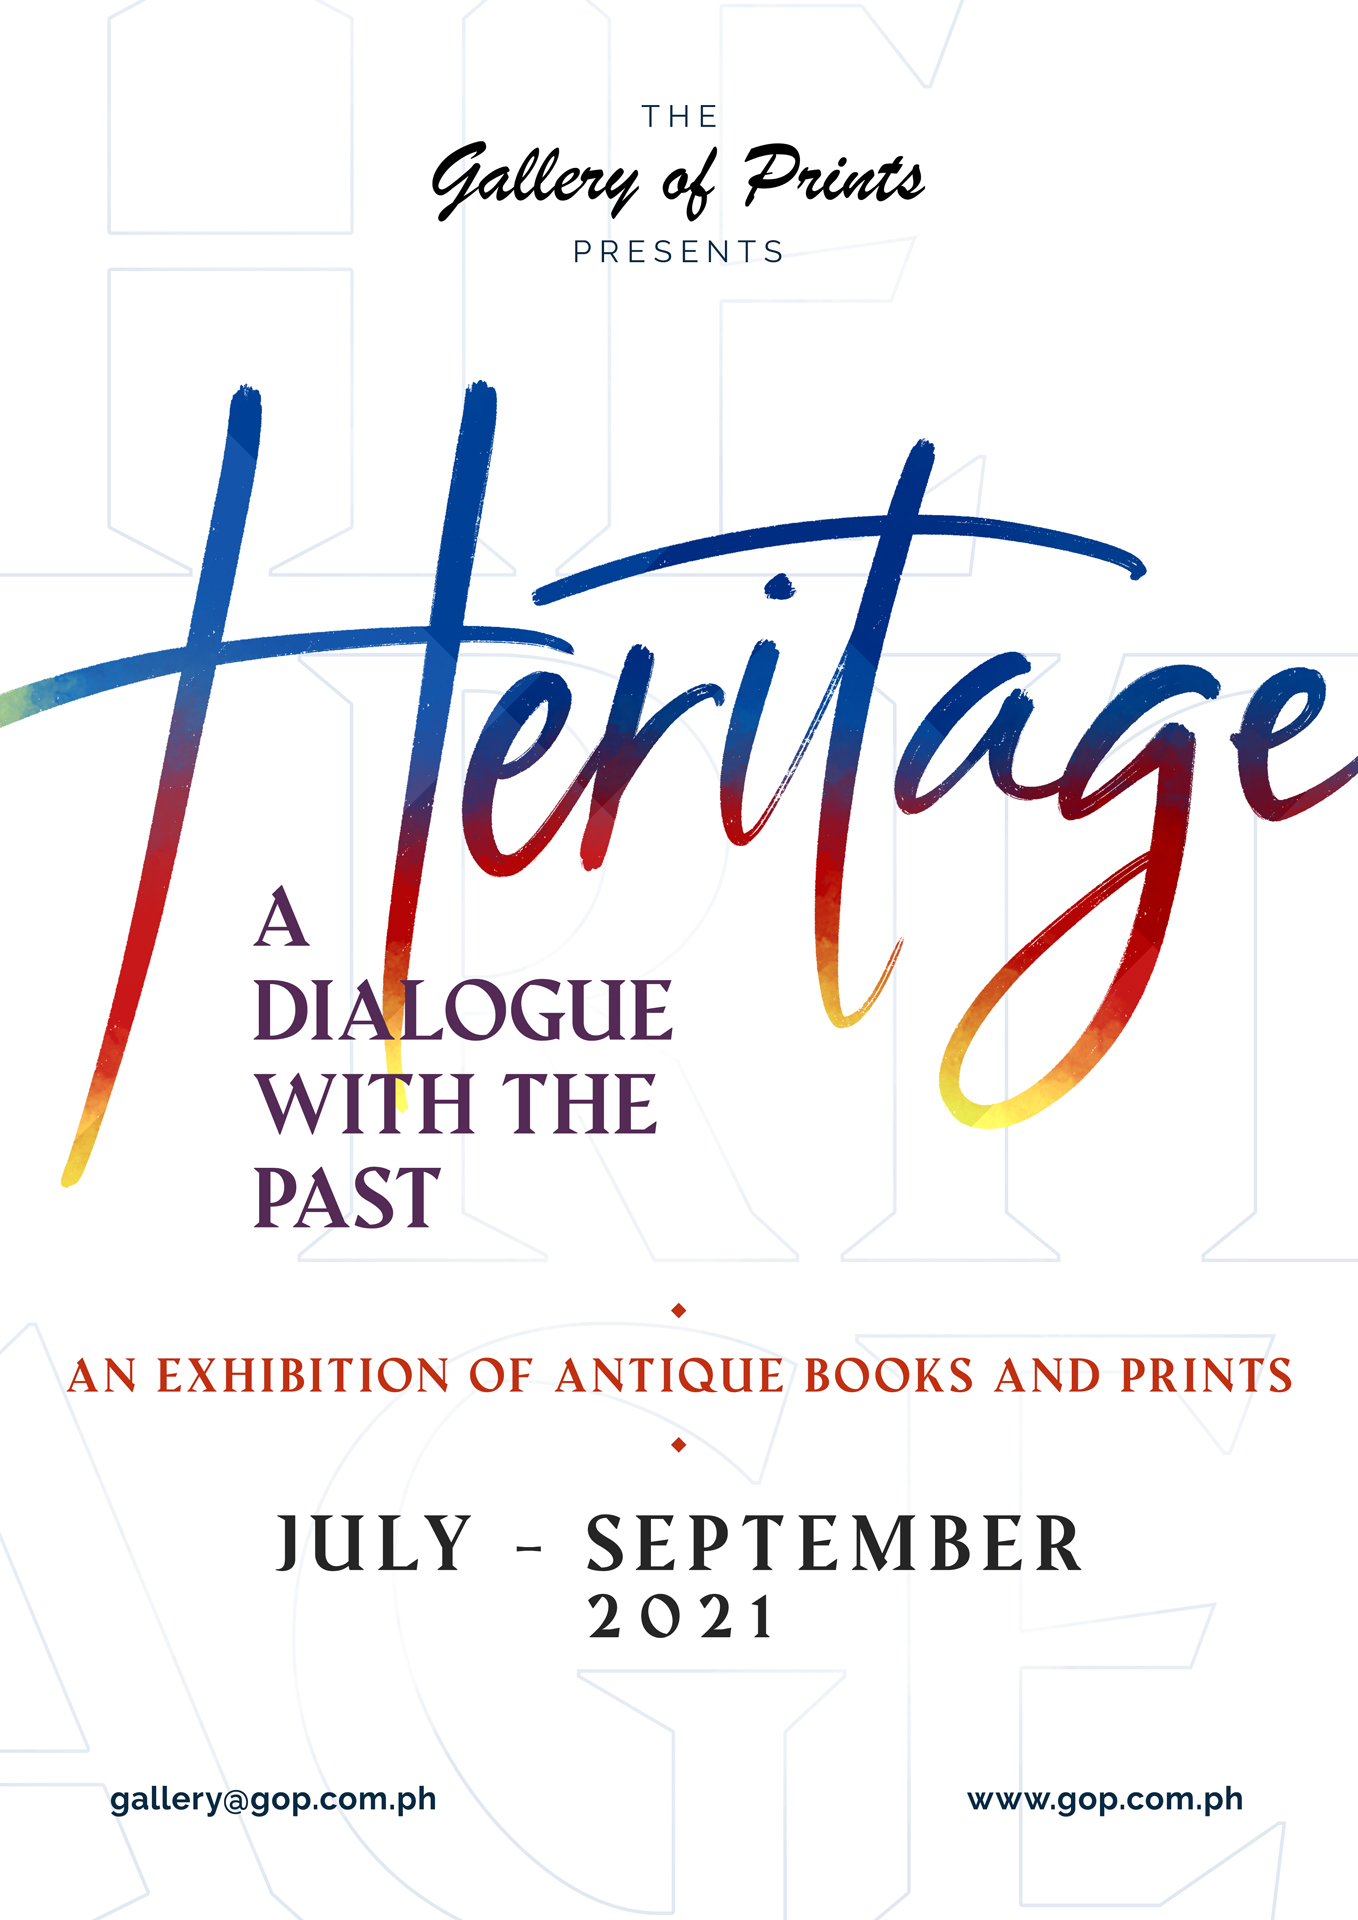 Heritage | A Dialogue with the Past